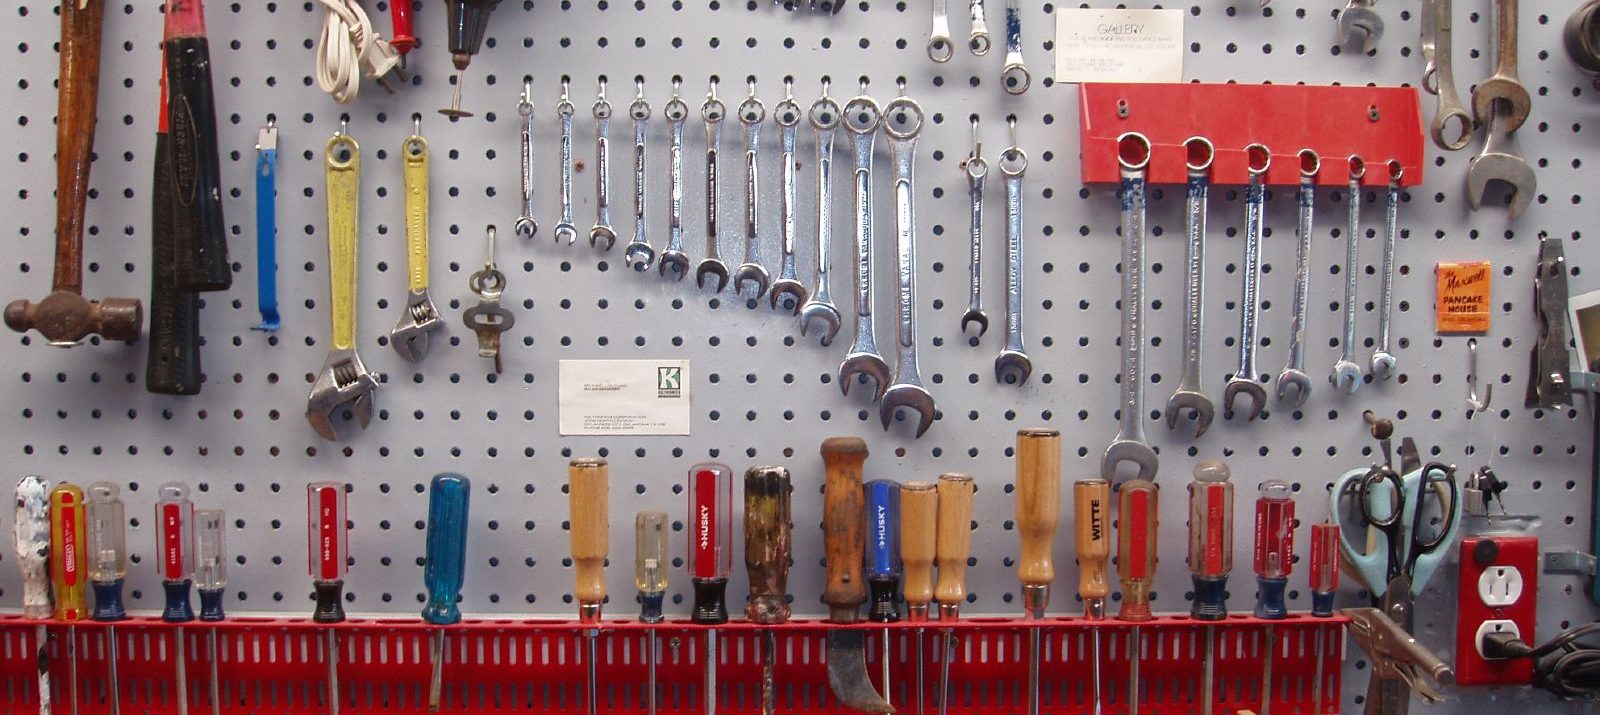 diy pegboard ideas for garage tools and storage